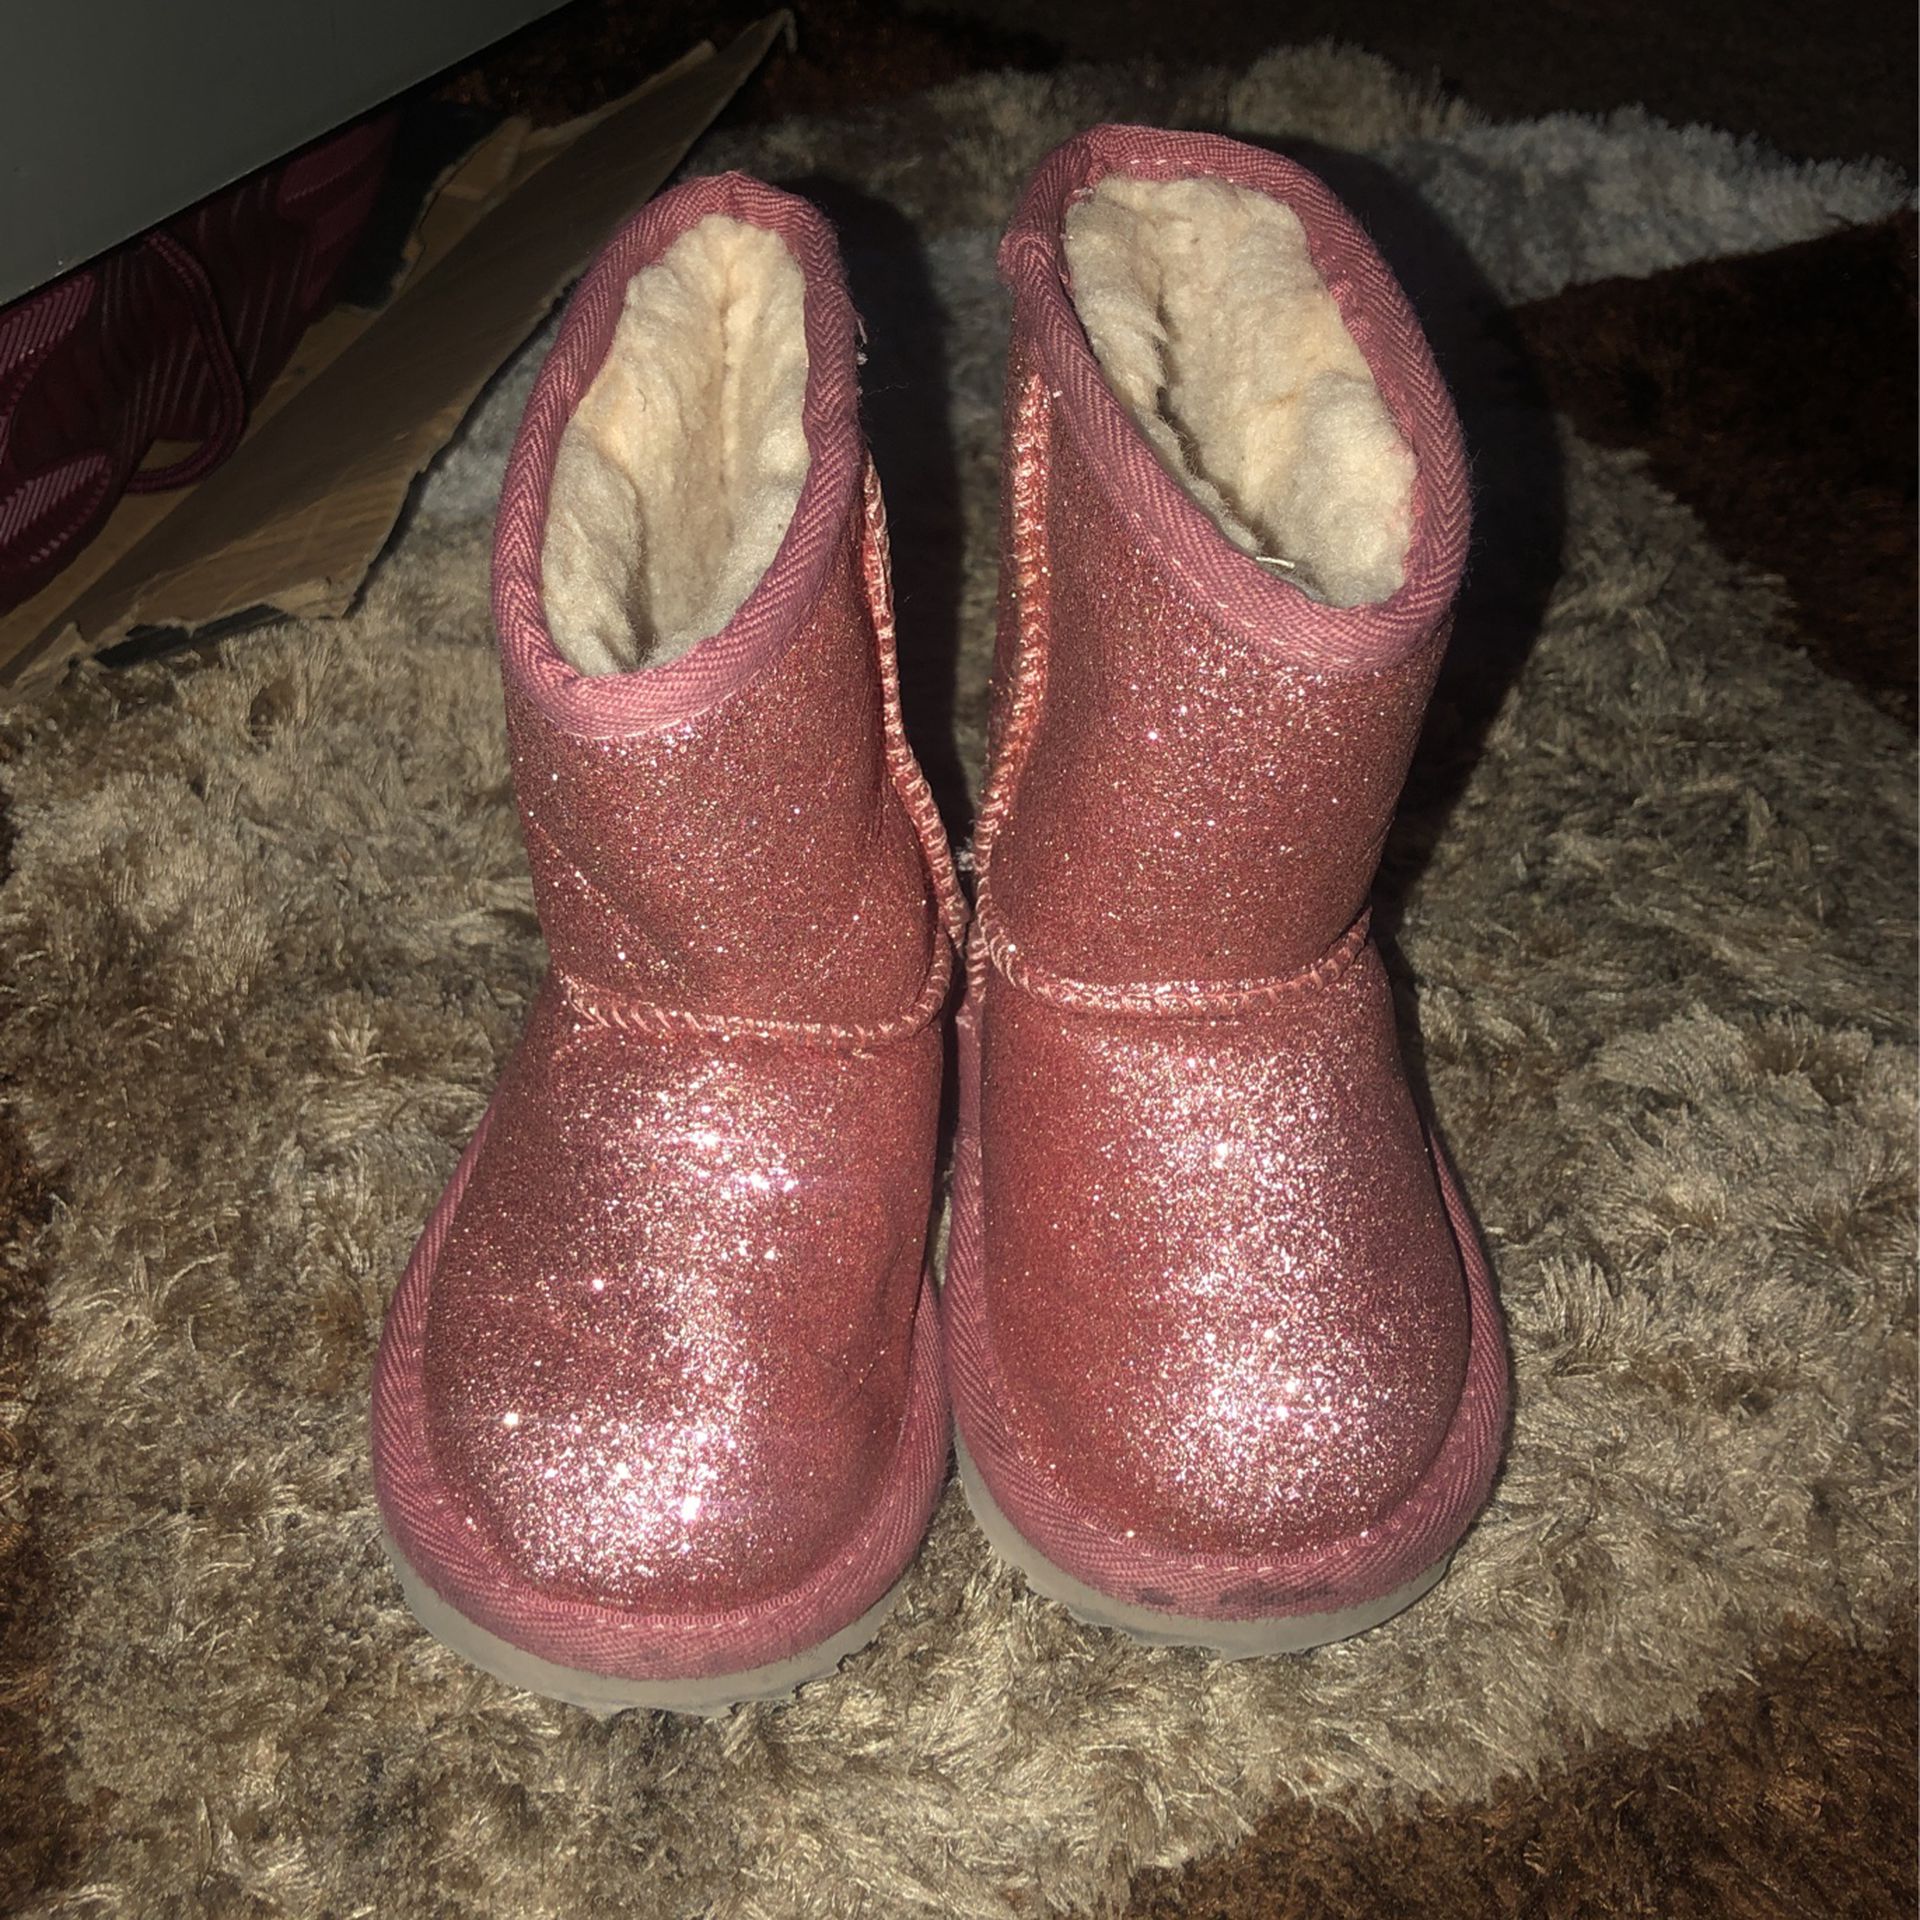 Ugg Boots Toddler Size 6 Sparkle Pink Uggs